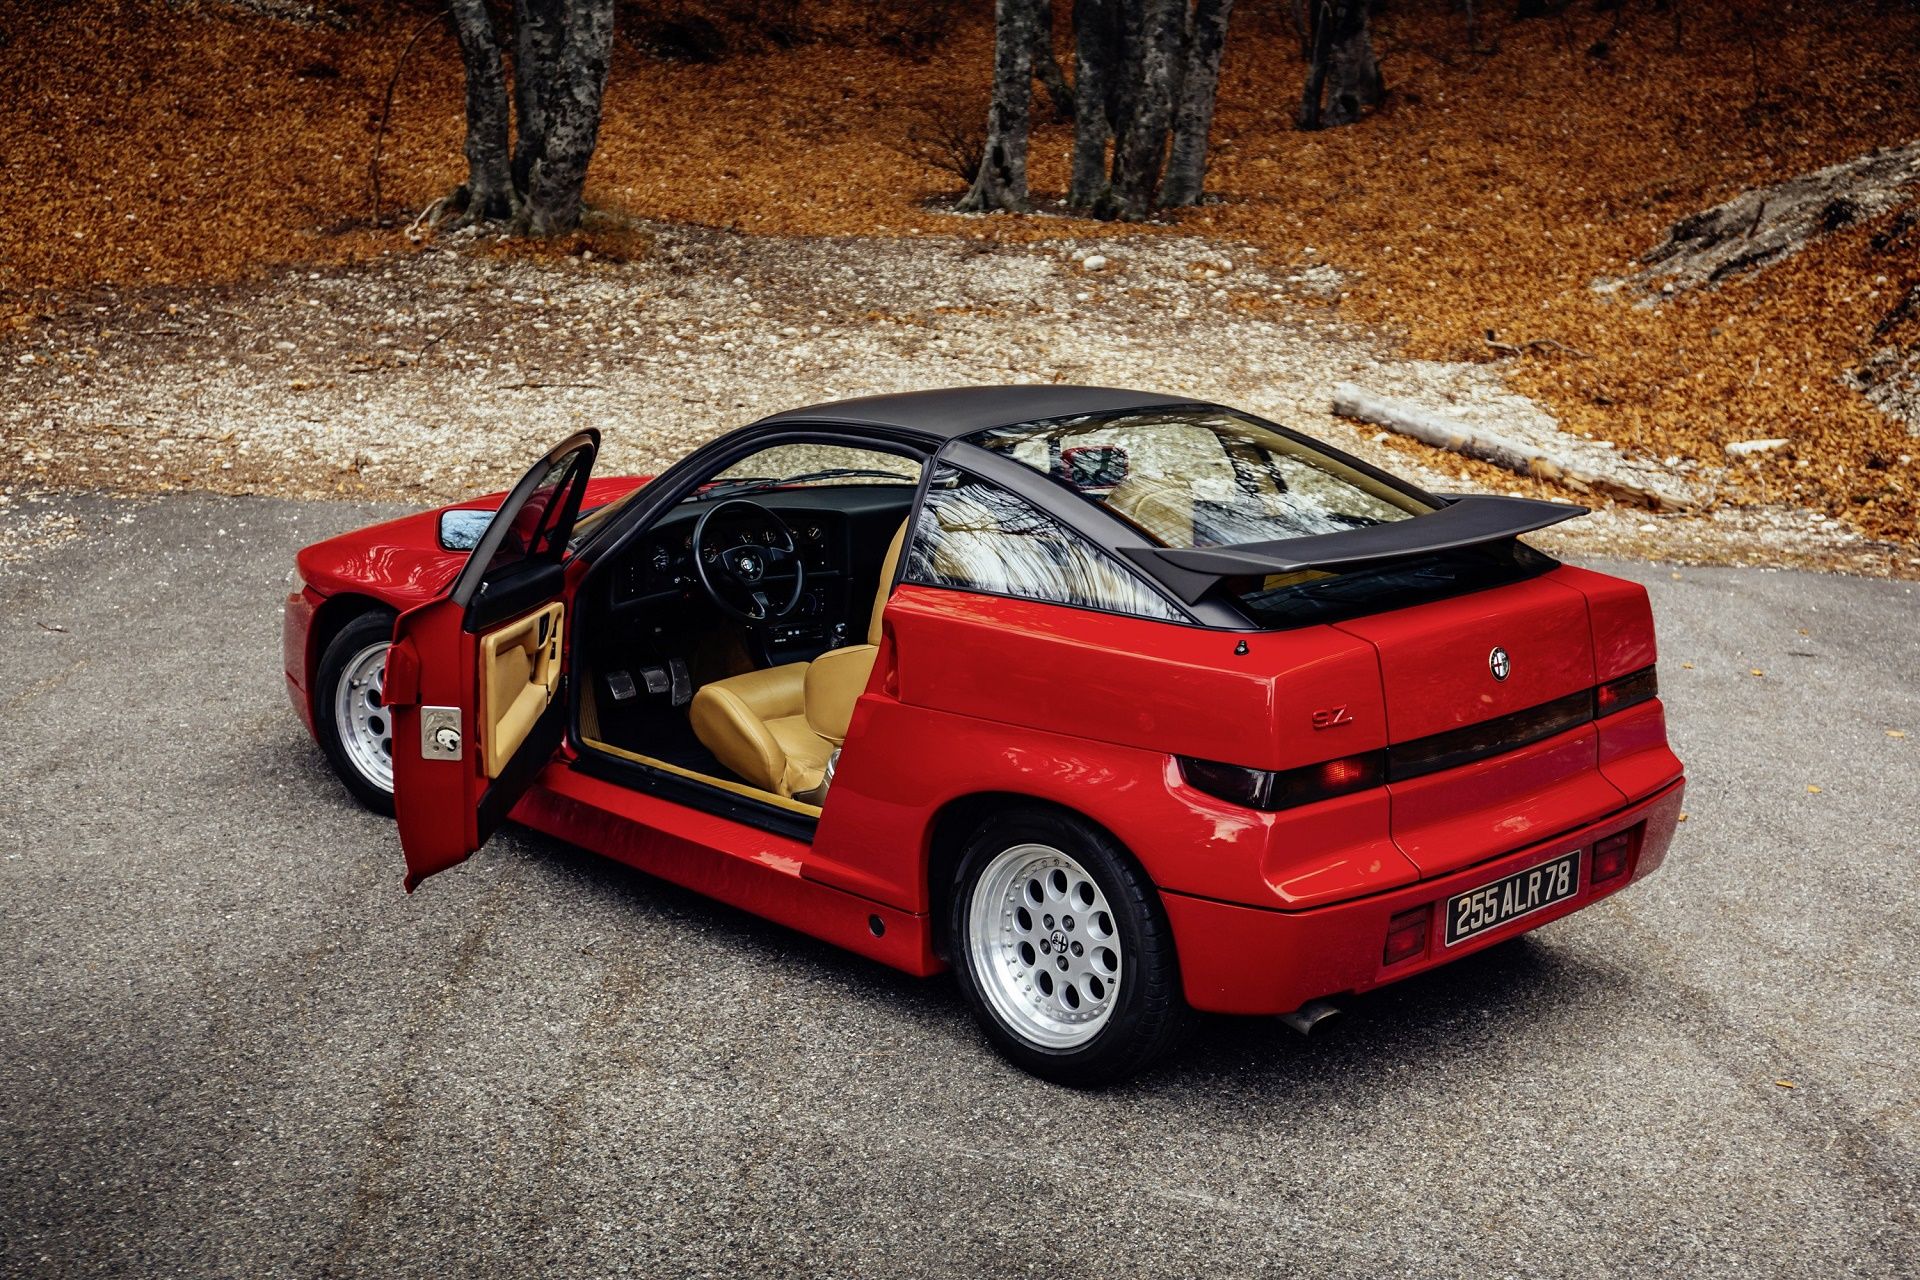 Red Alfa Romeo SZ on an autumn day with its driver door open